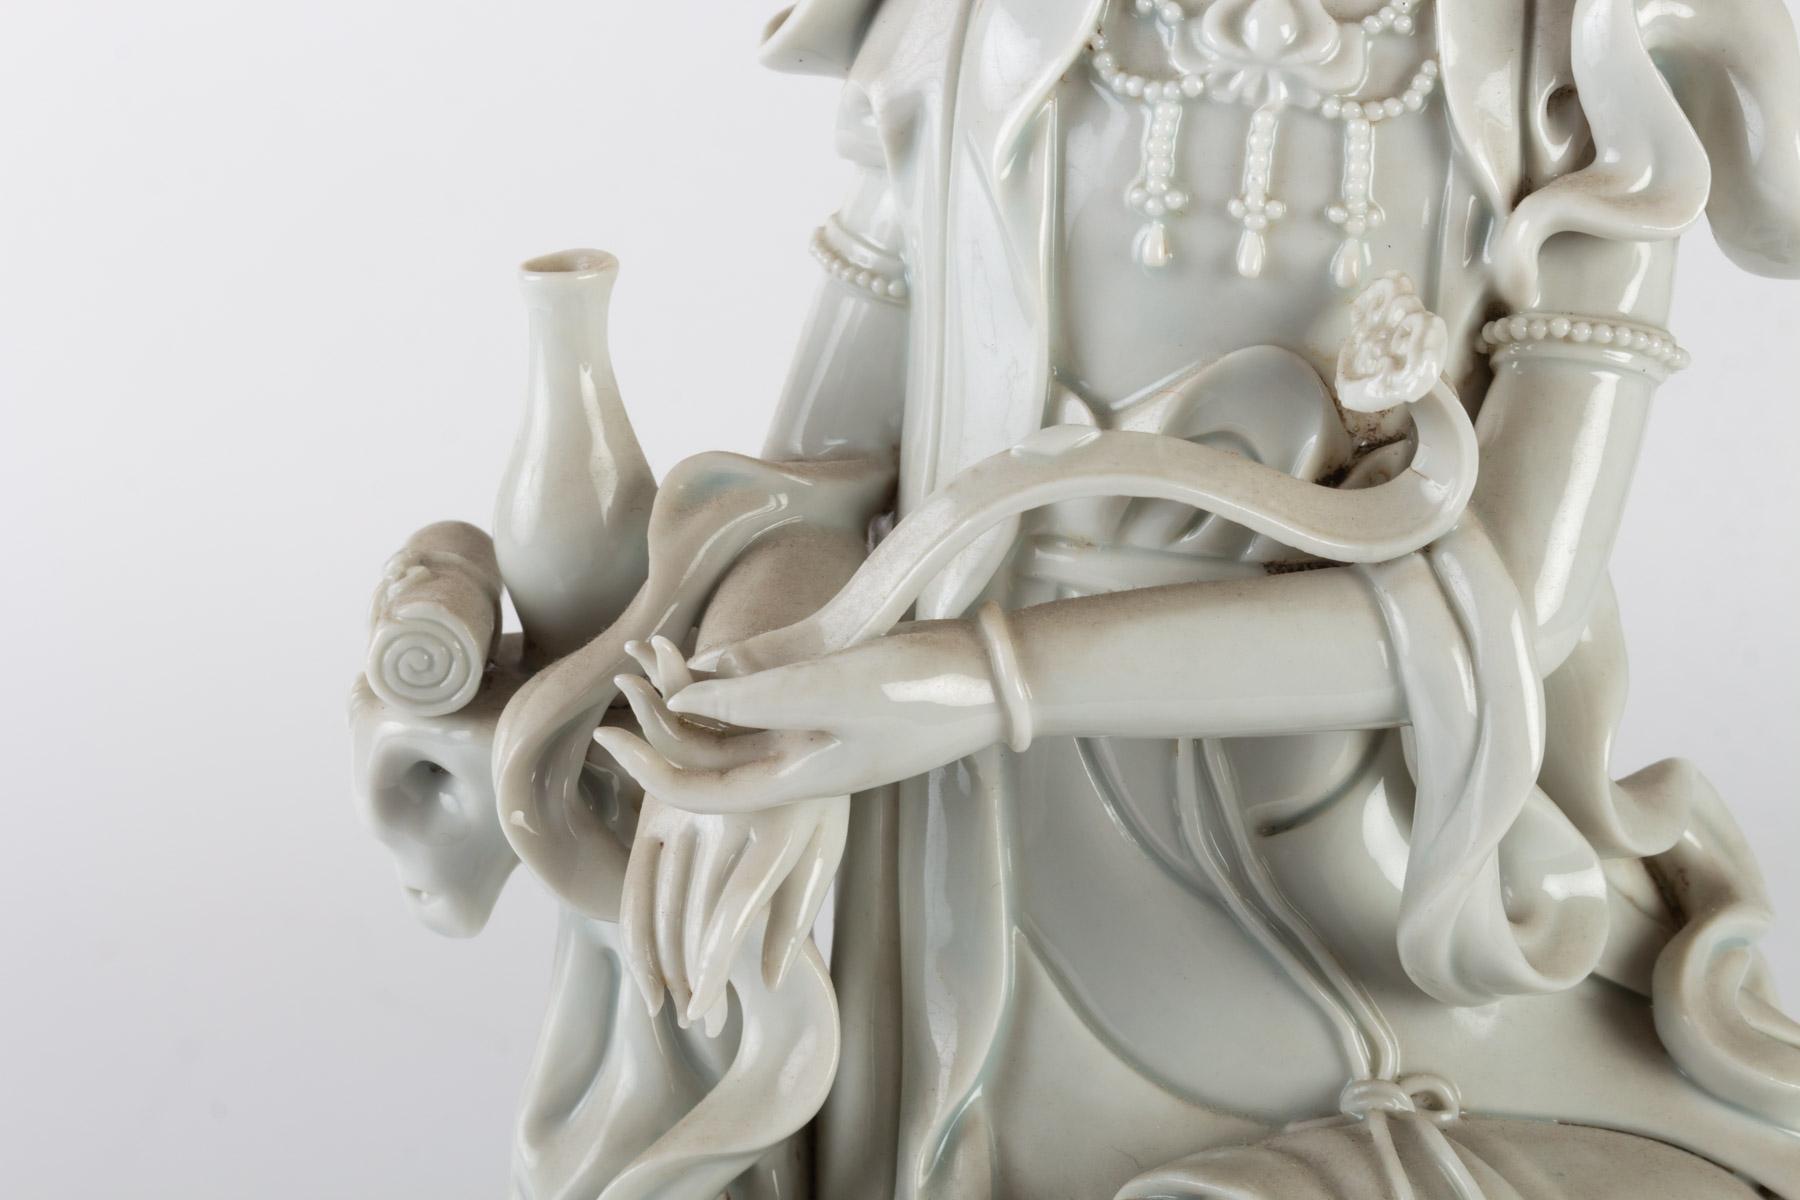 Chinese Export White Porcelain Statuette of a Divinity and His Child